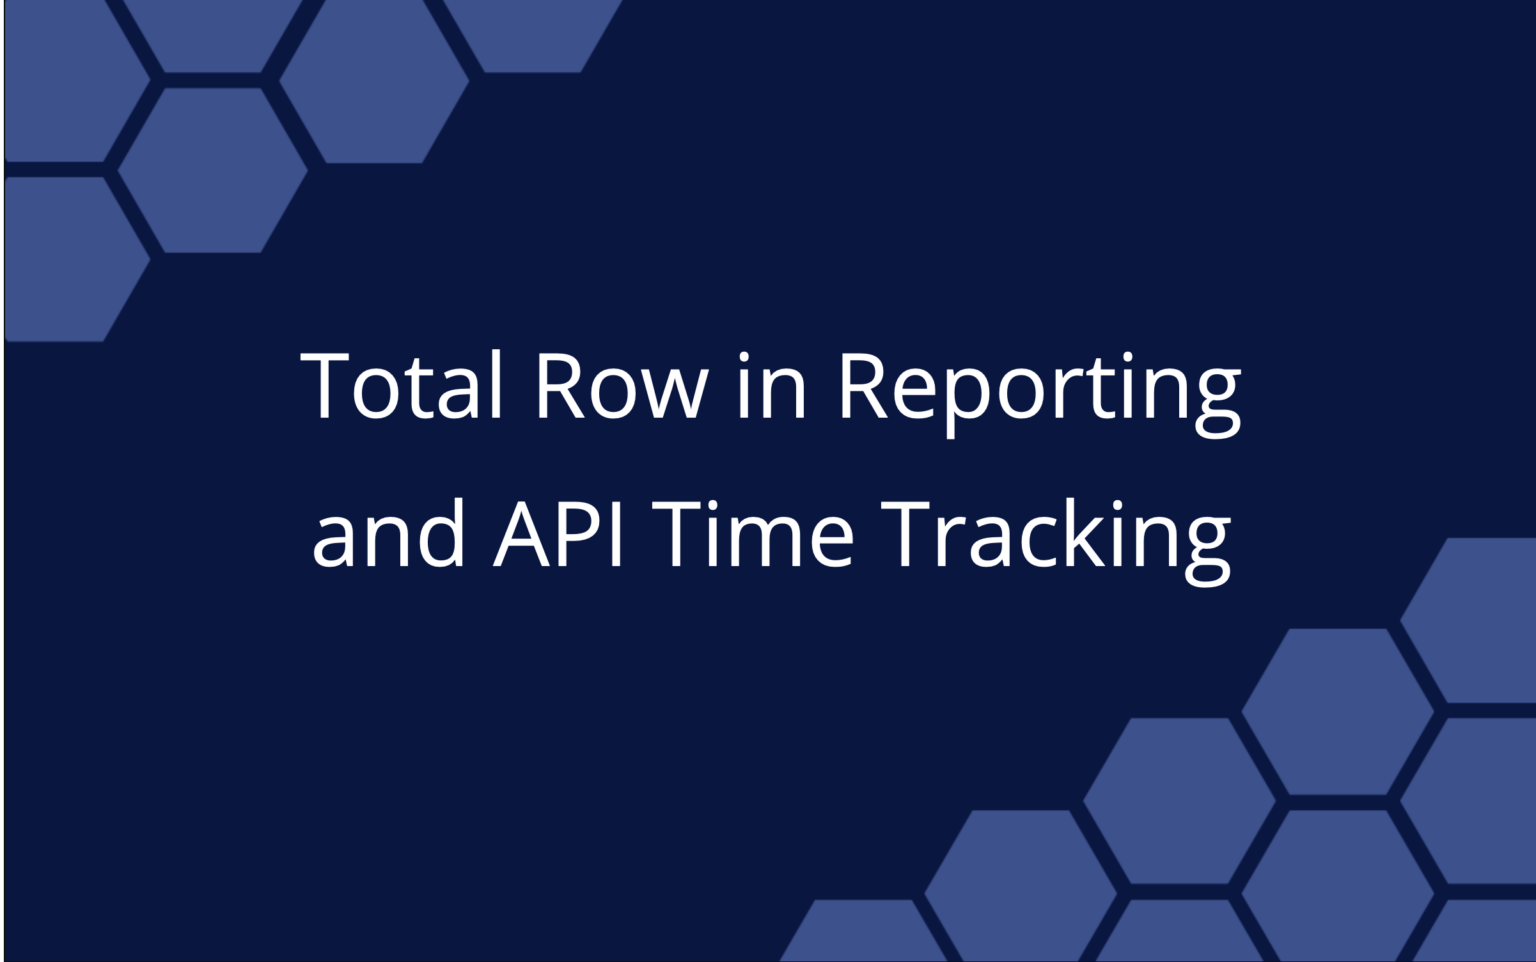 Total Row in Reporting and API Time Tracking